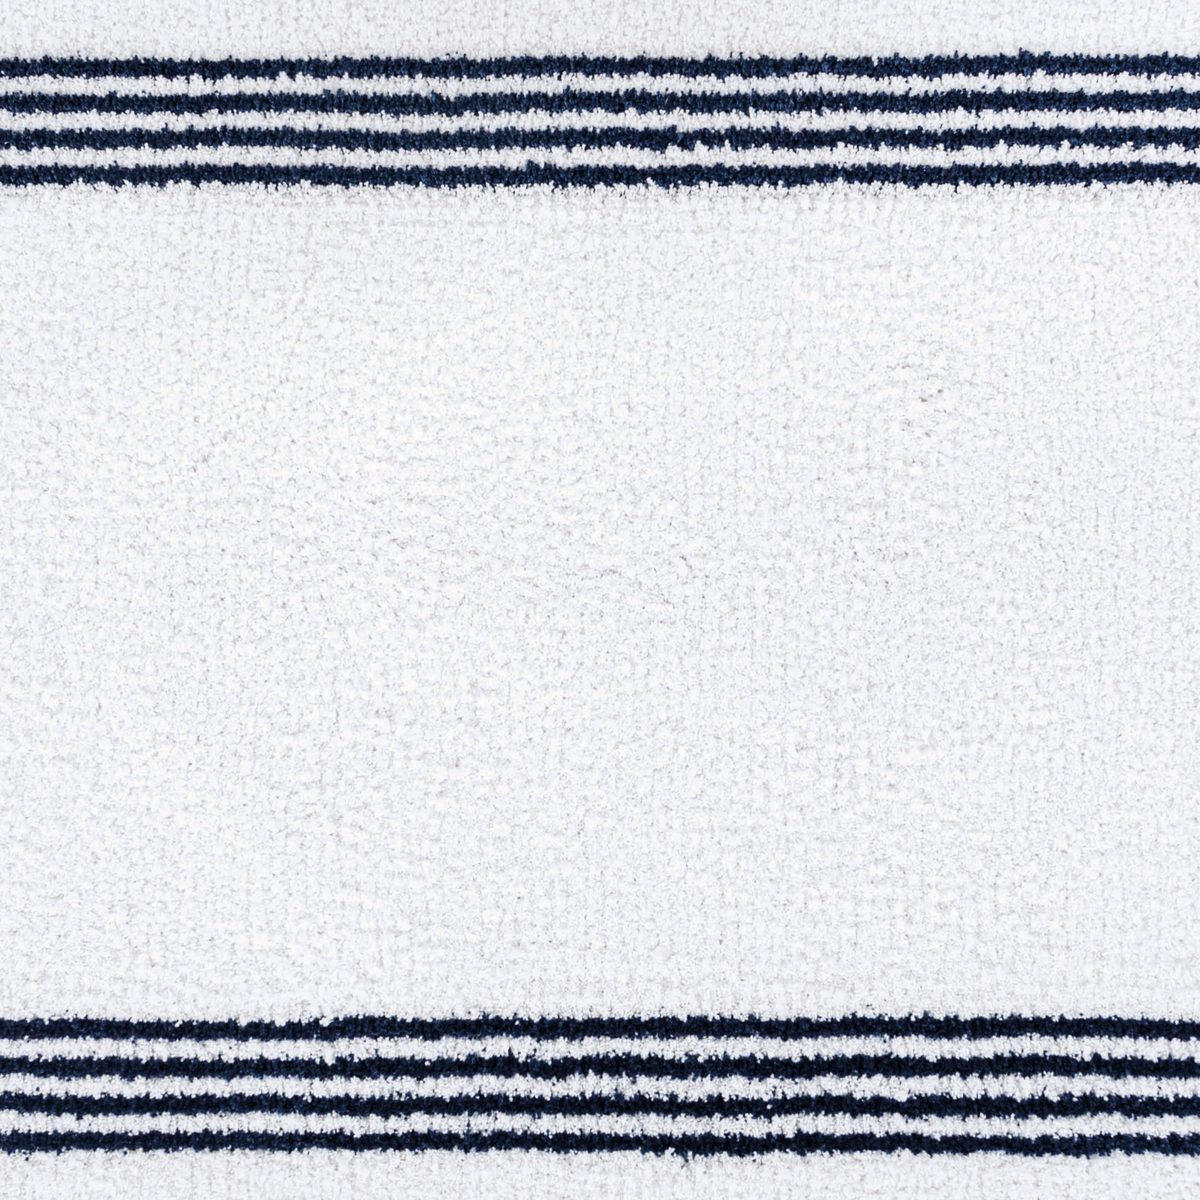 Swatch Sample of Graccioza Bourdon Bath Towels and Rugs Oxford